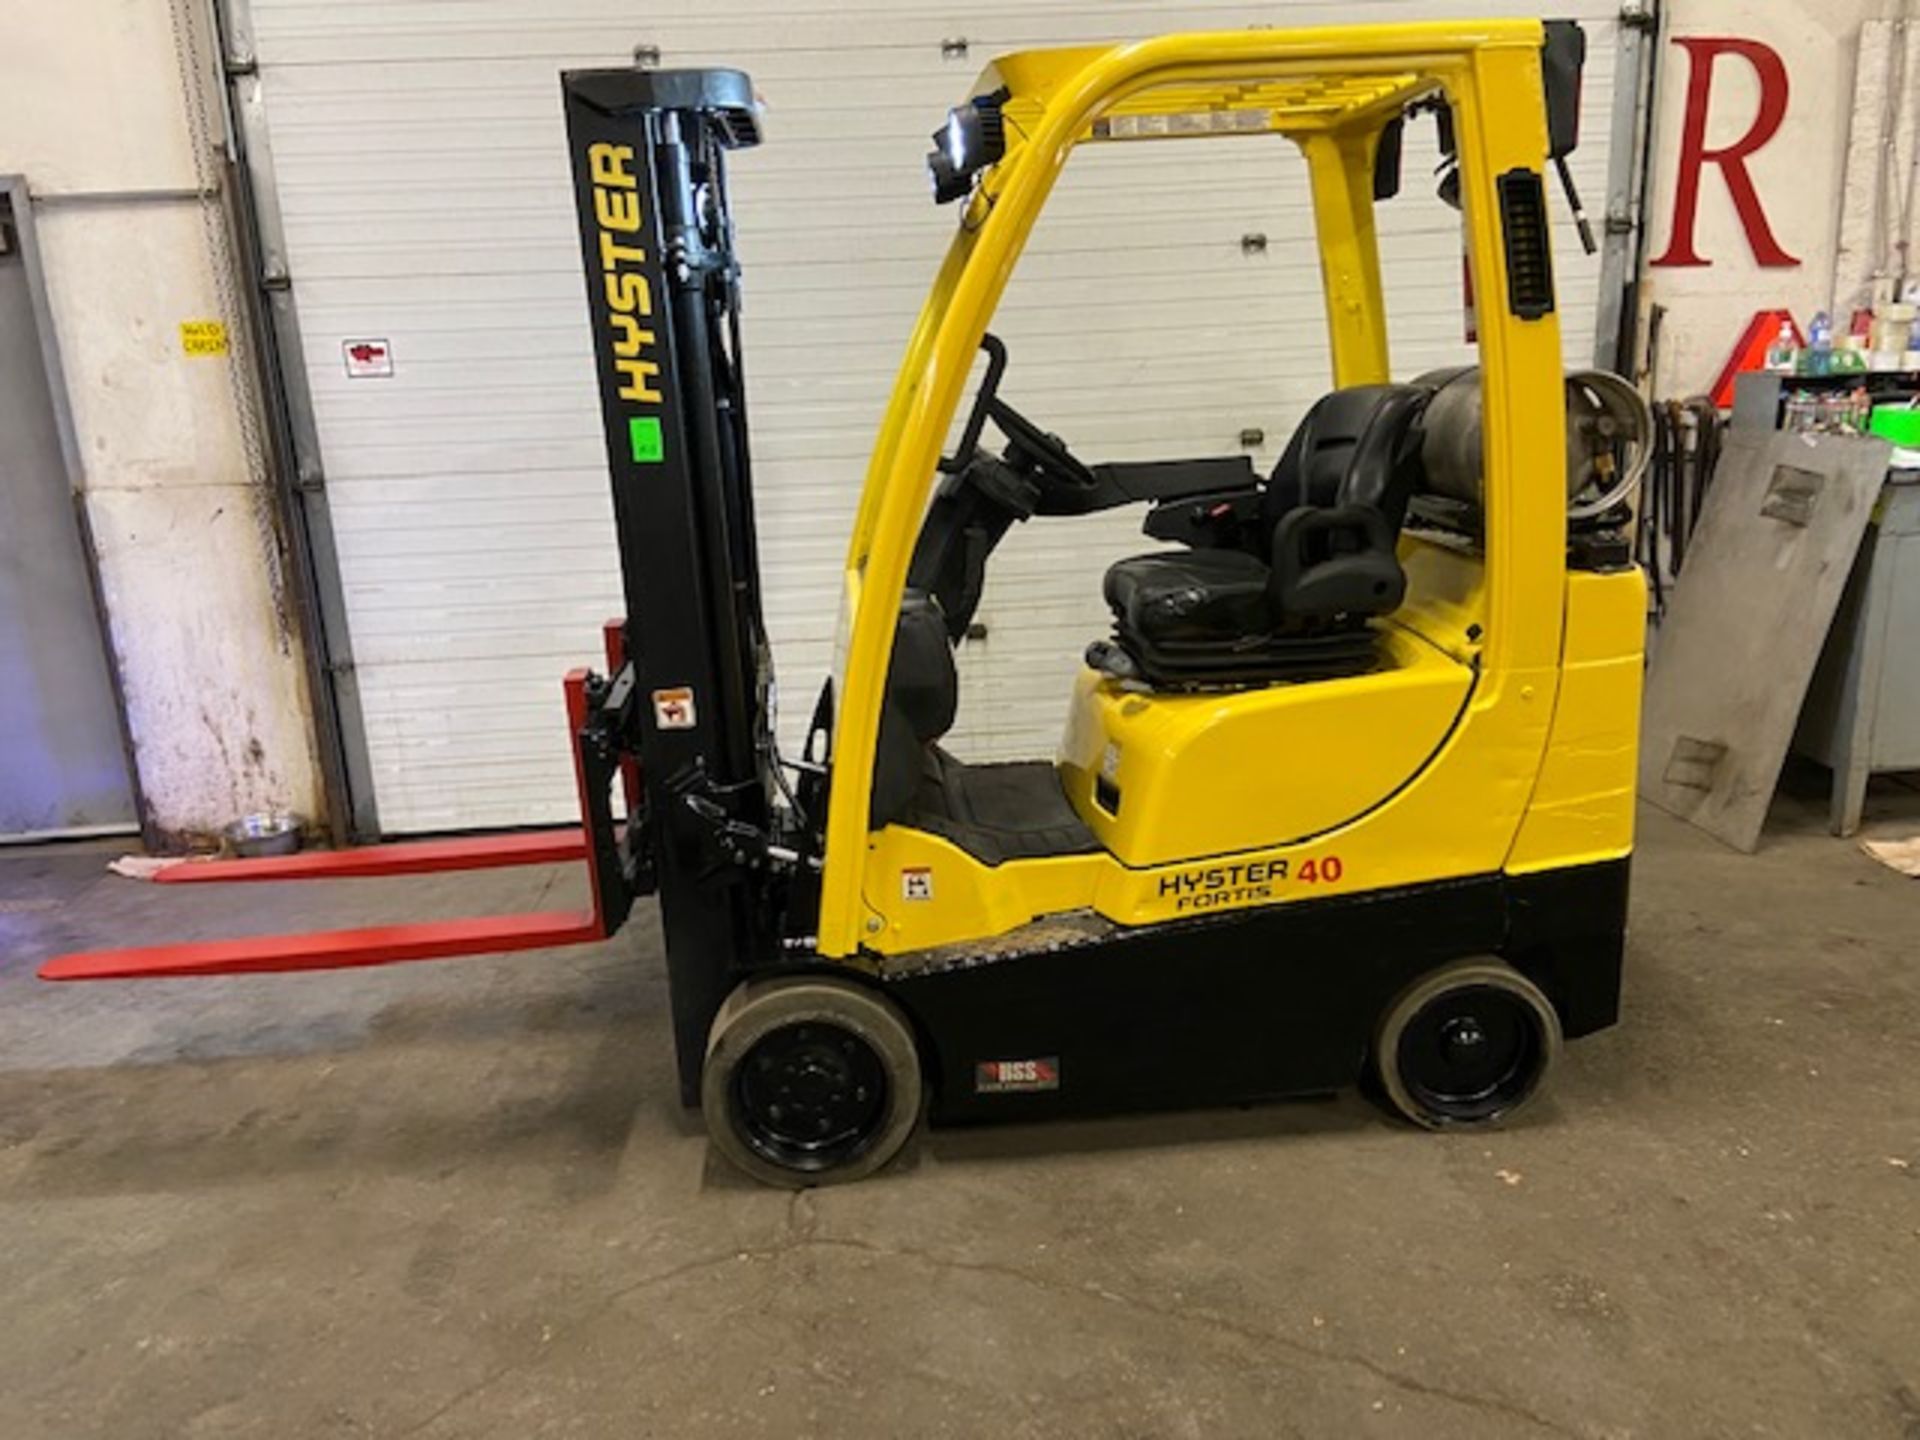 FREE CUSTOMS - 2016 Hyster 4,000lbs Capacity Forklift LPG (propane) with 3-stage mast & sideshift (